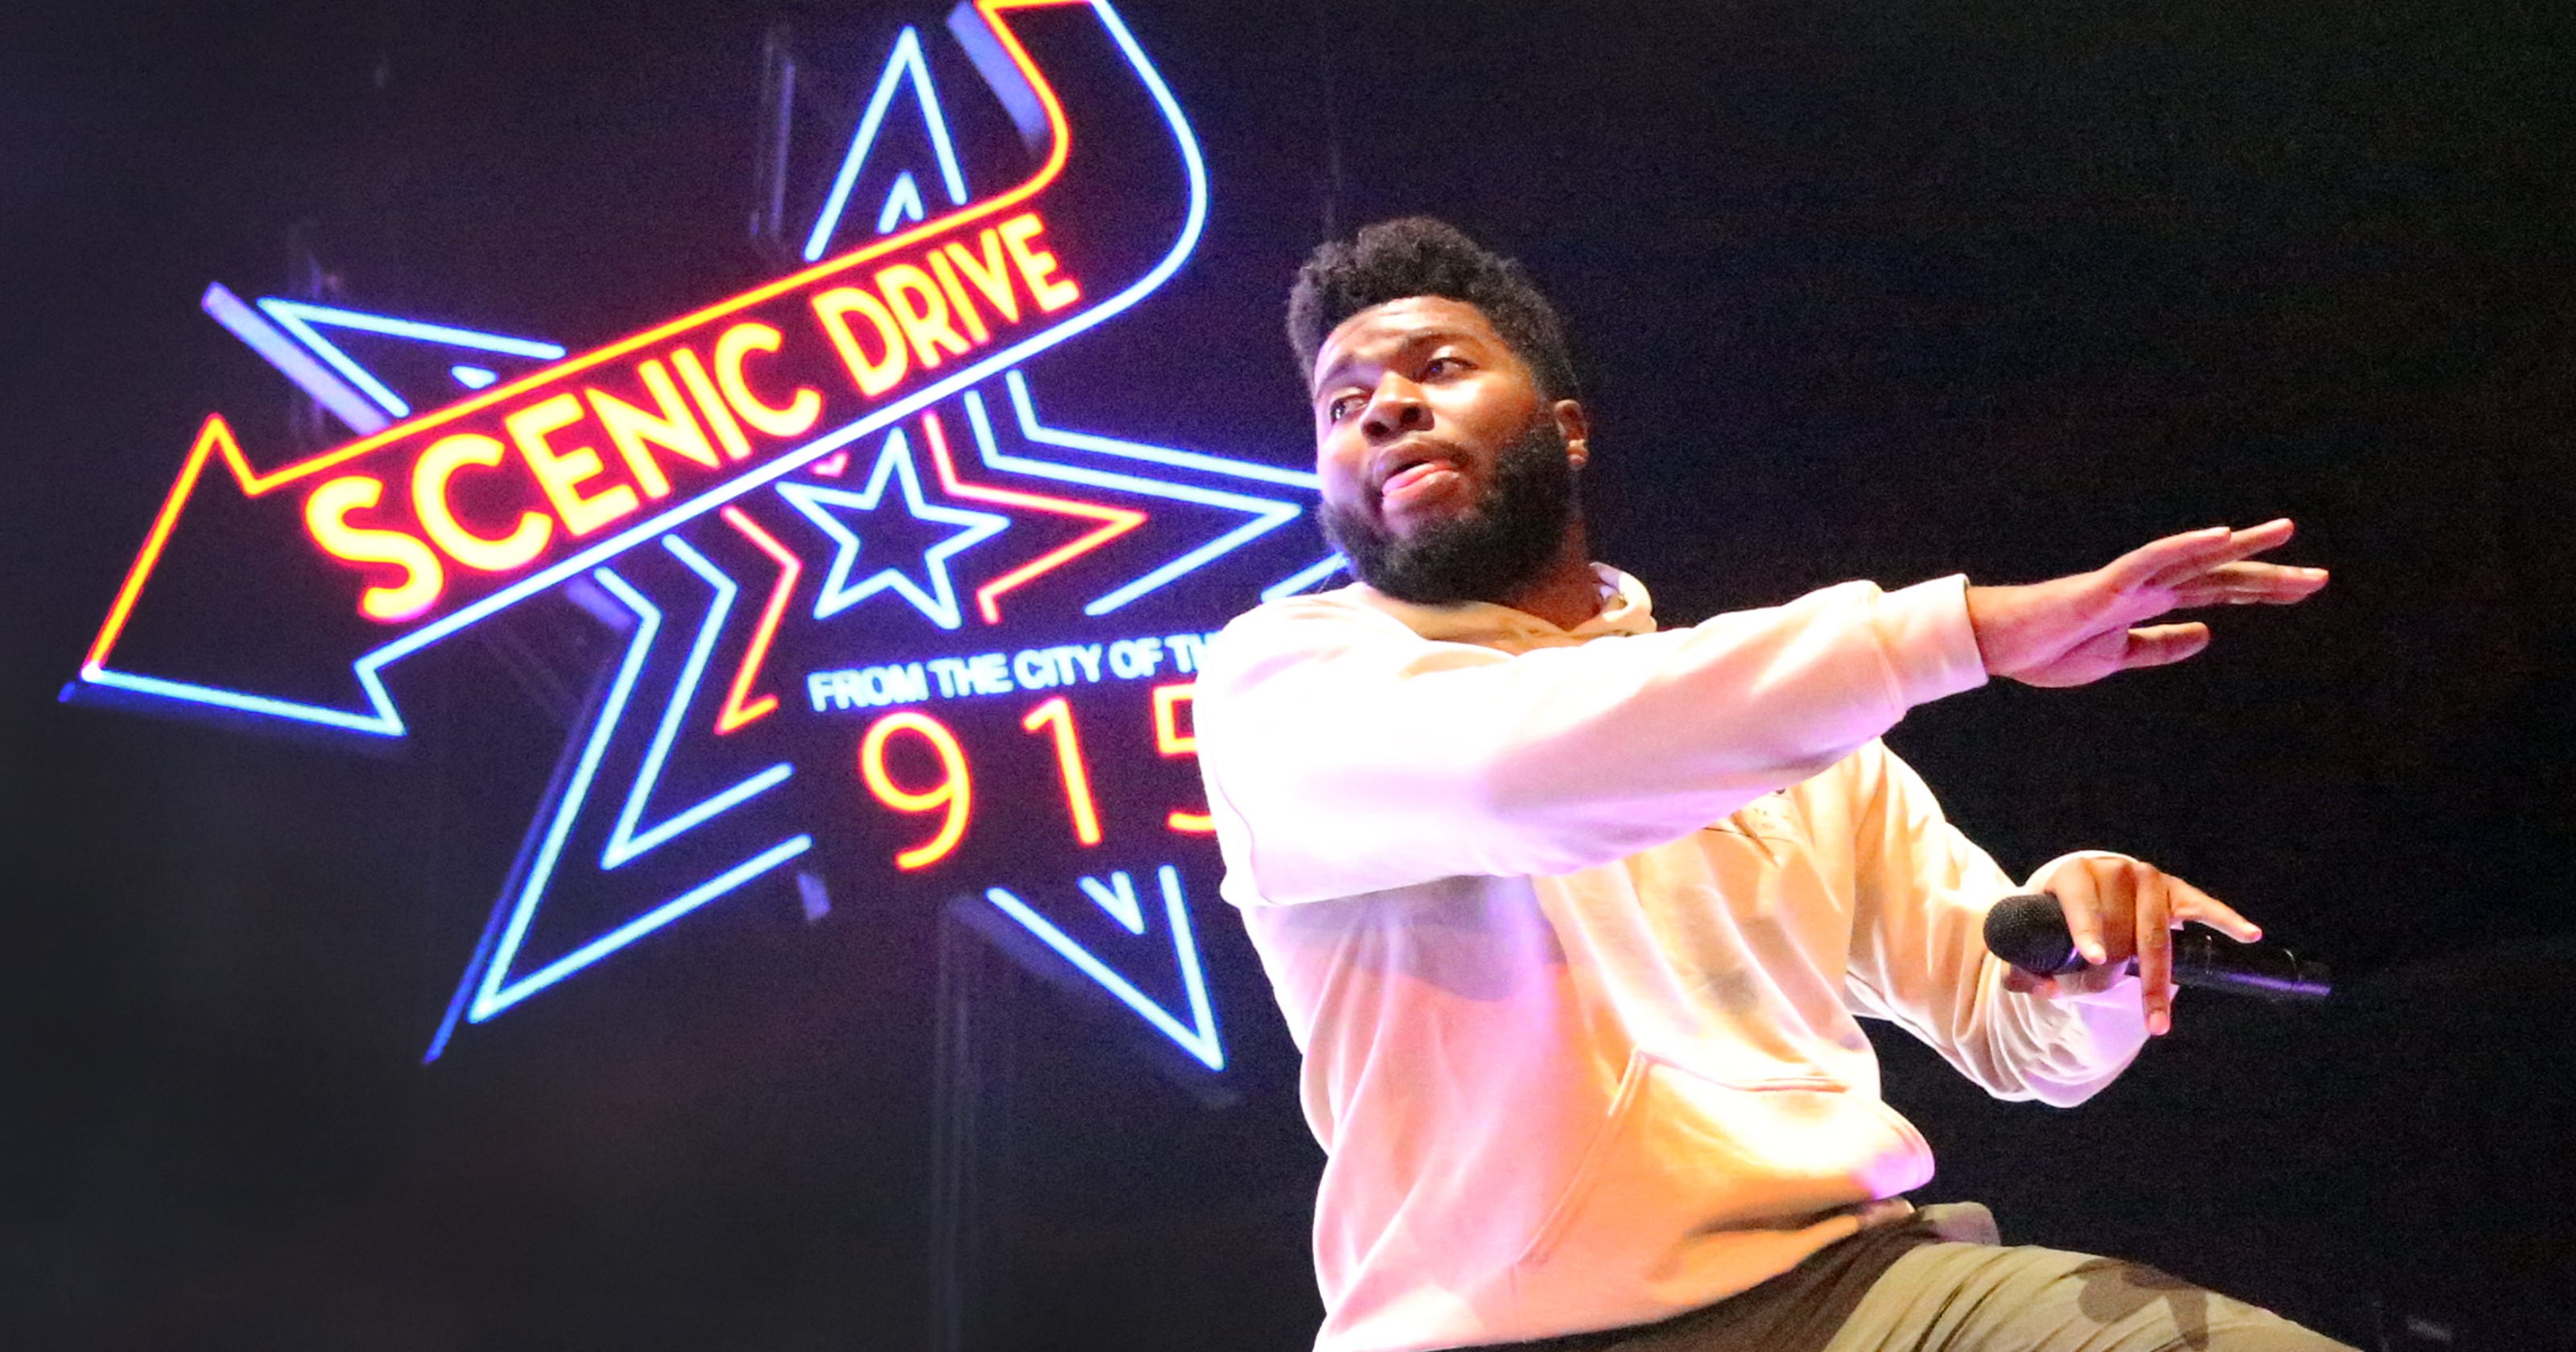 Khalid benefit concert Here's how to get tickets